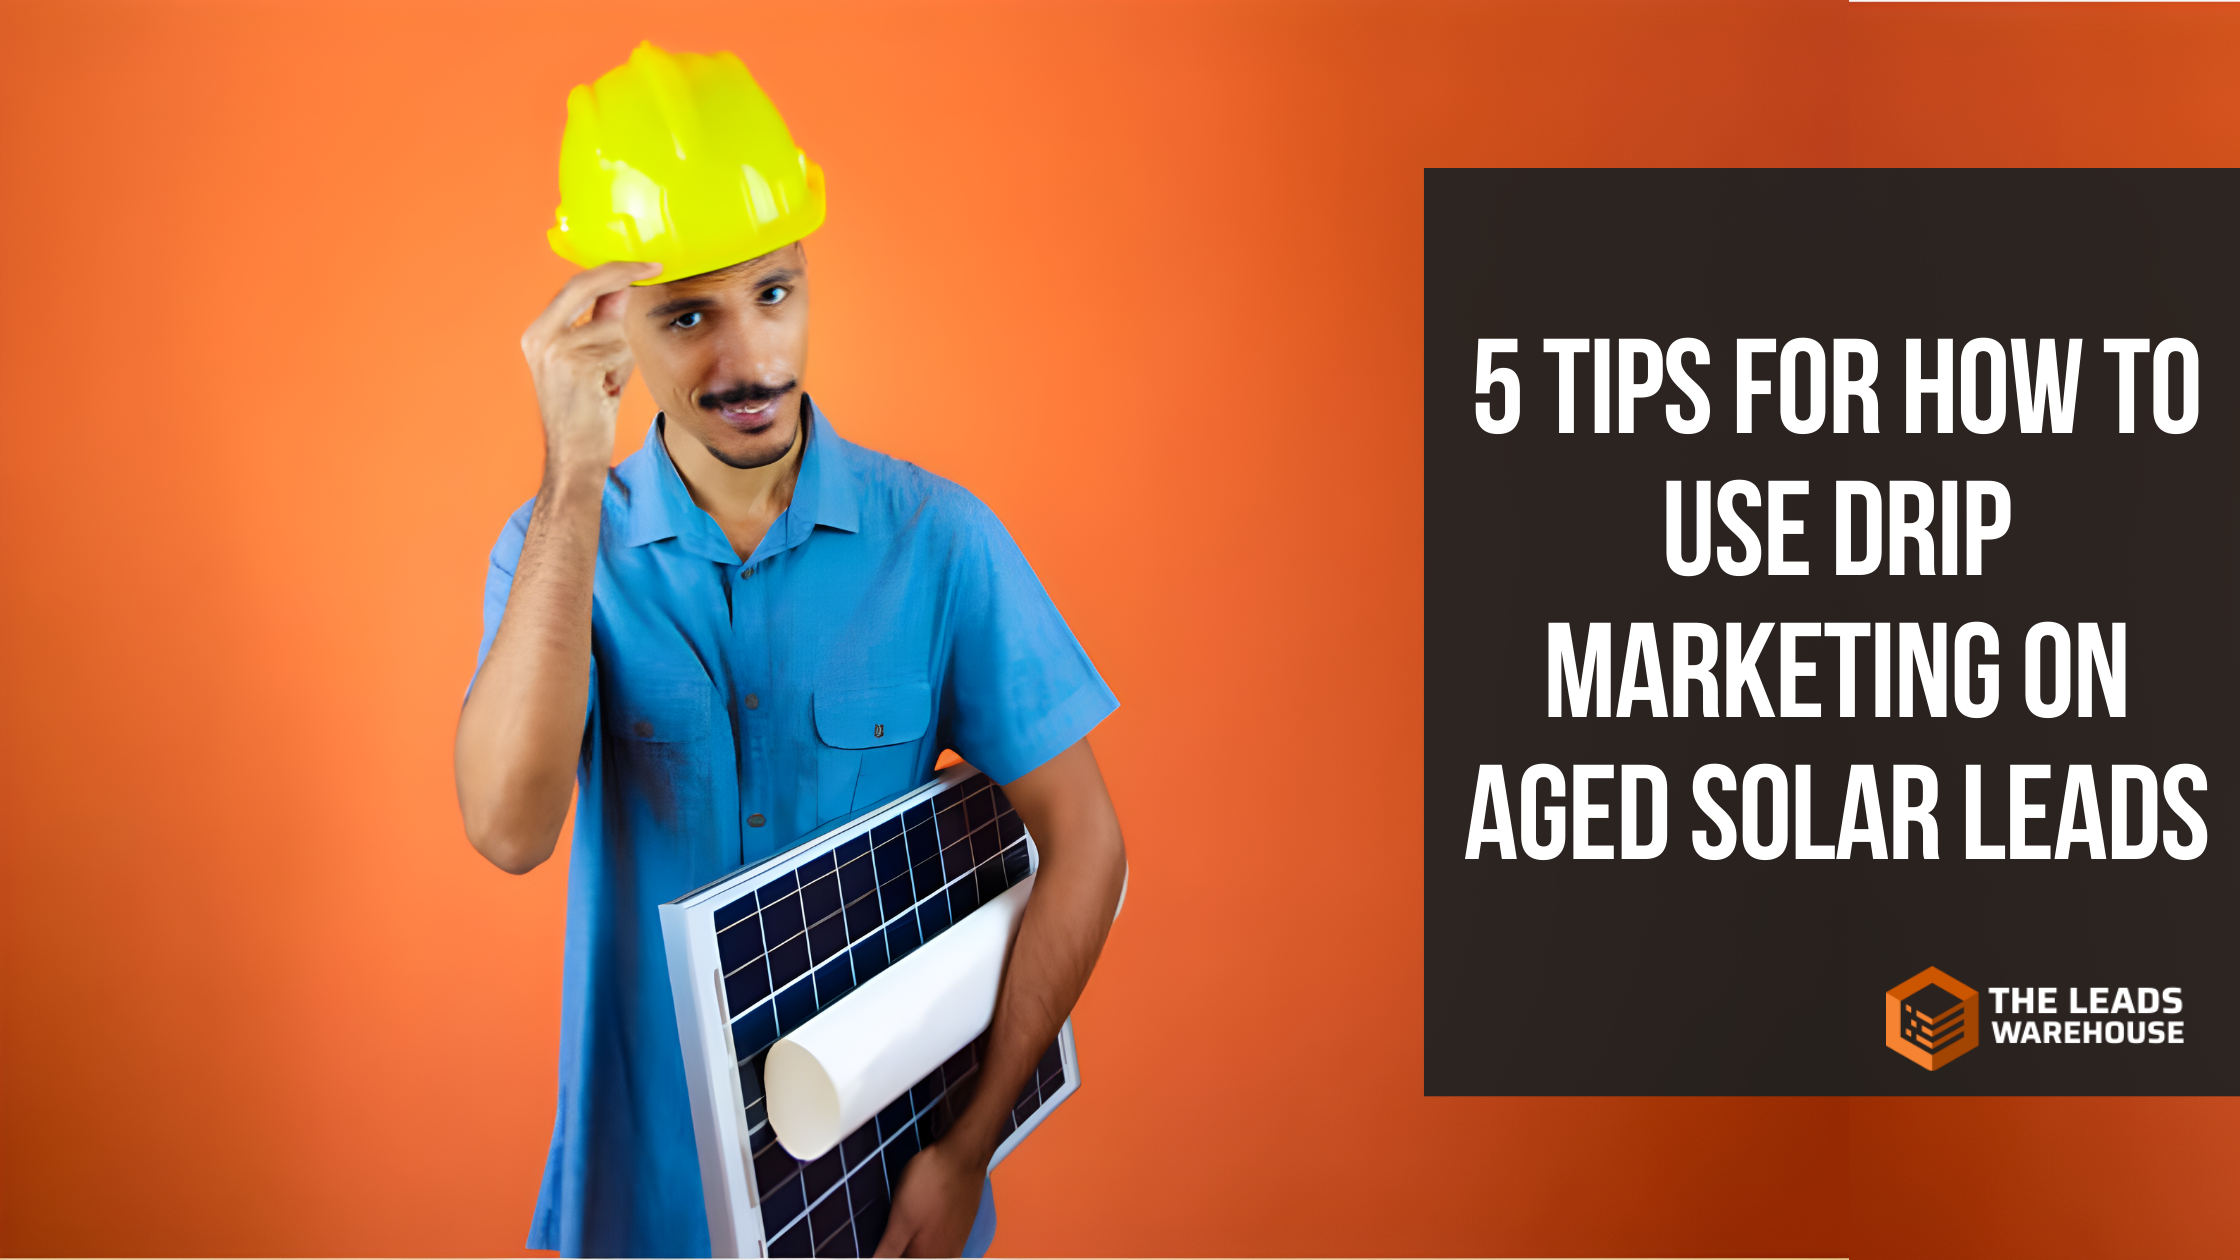 Drip Marketing on Aged Solar Leads | 5 Tips